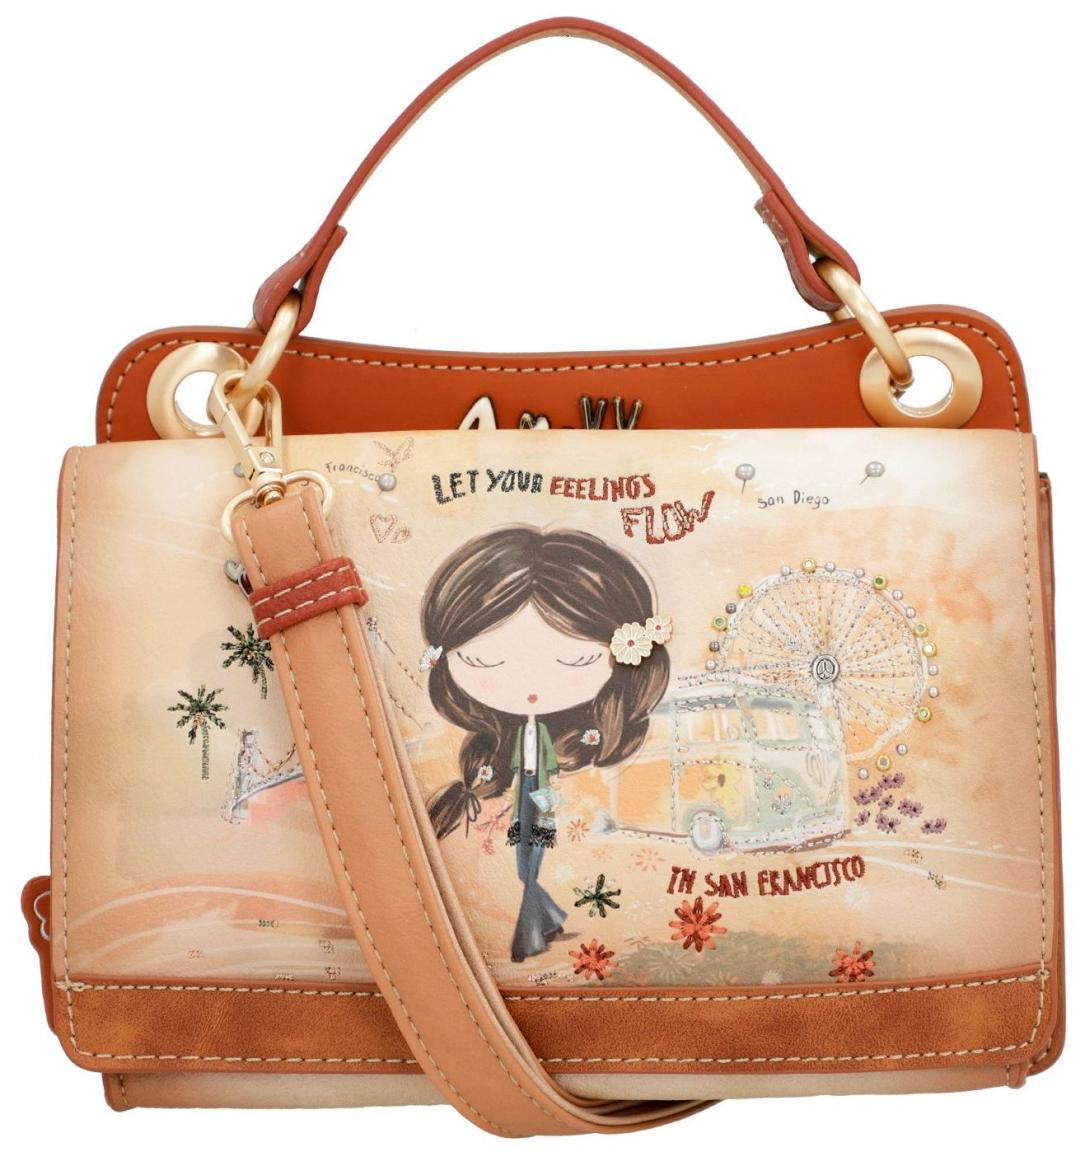 Microbag Anekke Peace and Love Camel Crossover